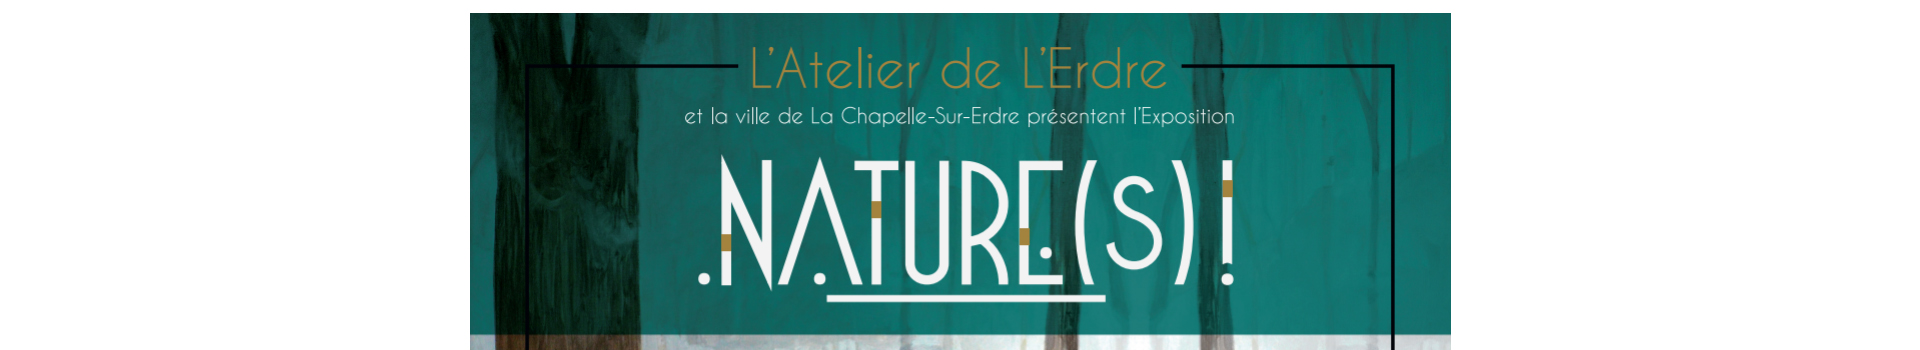 EXPOSITION NATURE(S) !